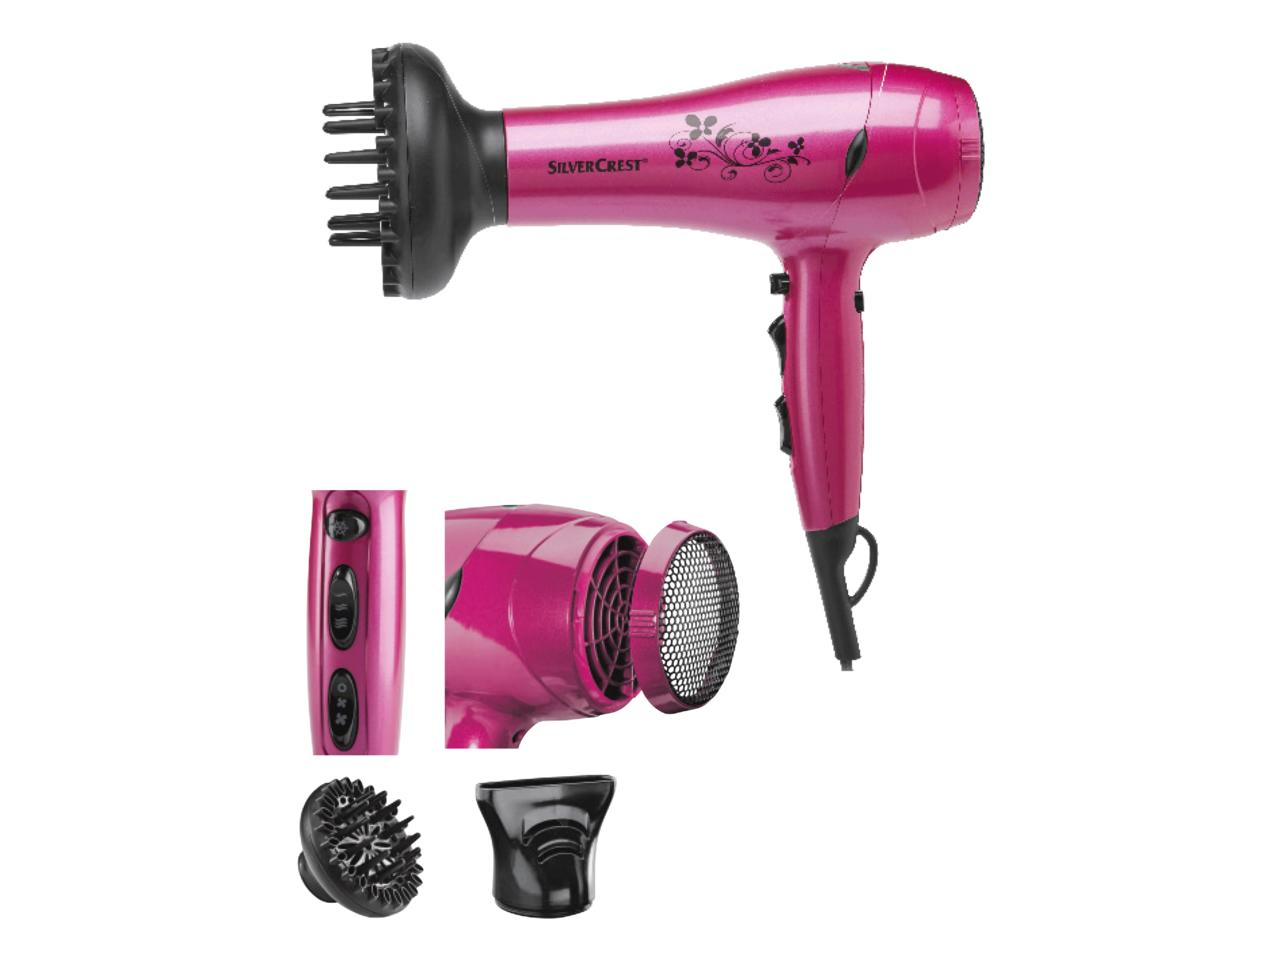 SILVERCREST PERSONAL CARE 2,200W Ionic Hairdryer